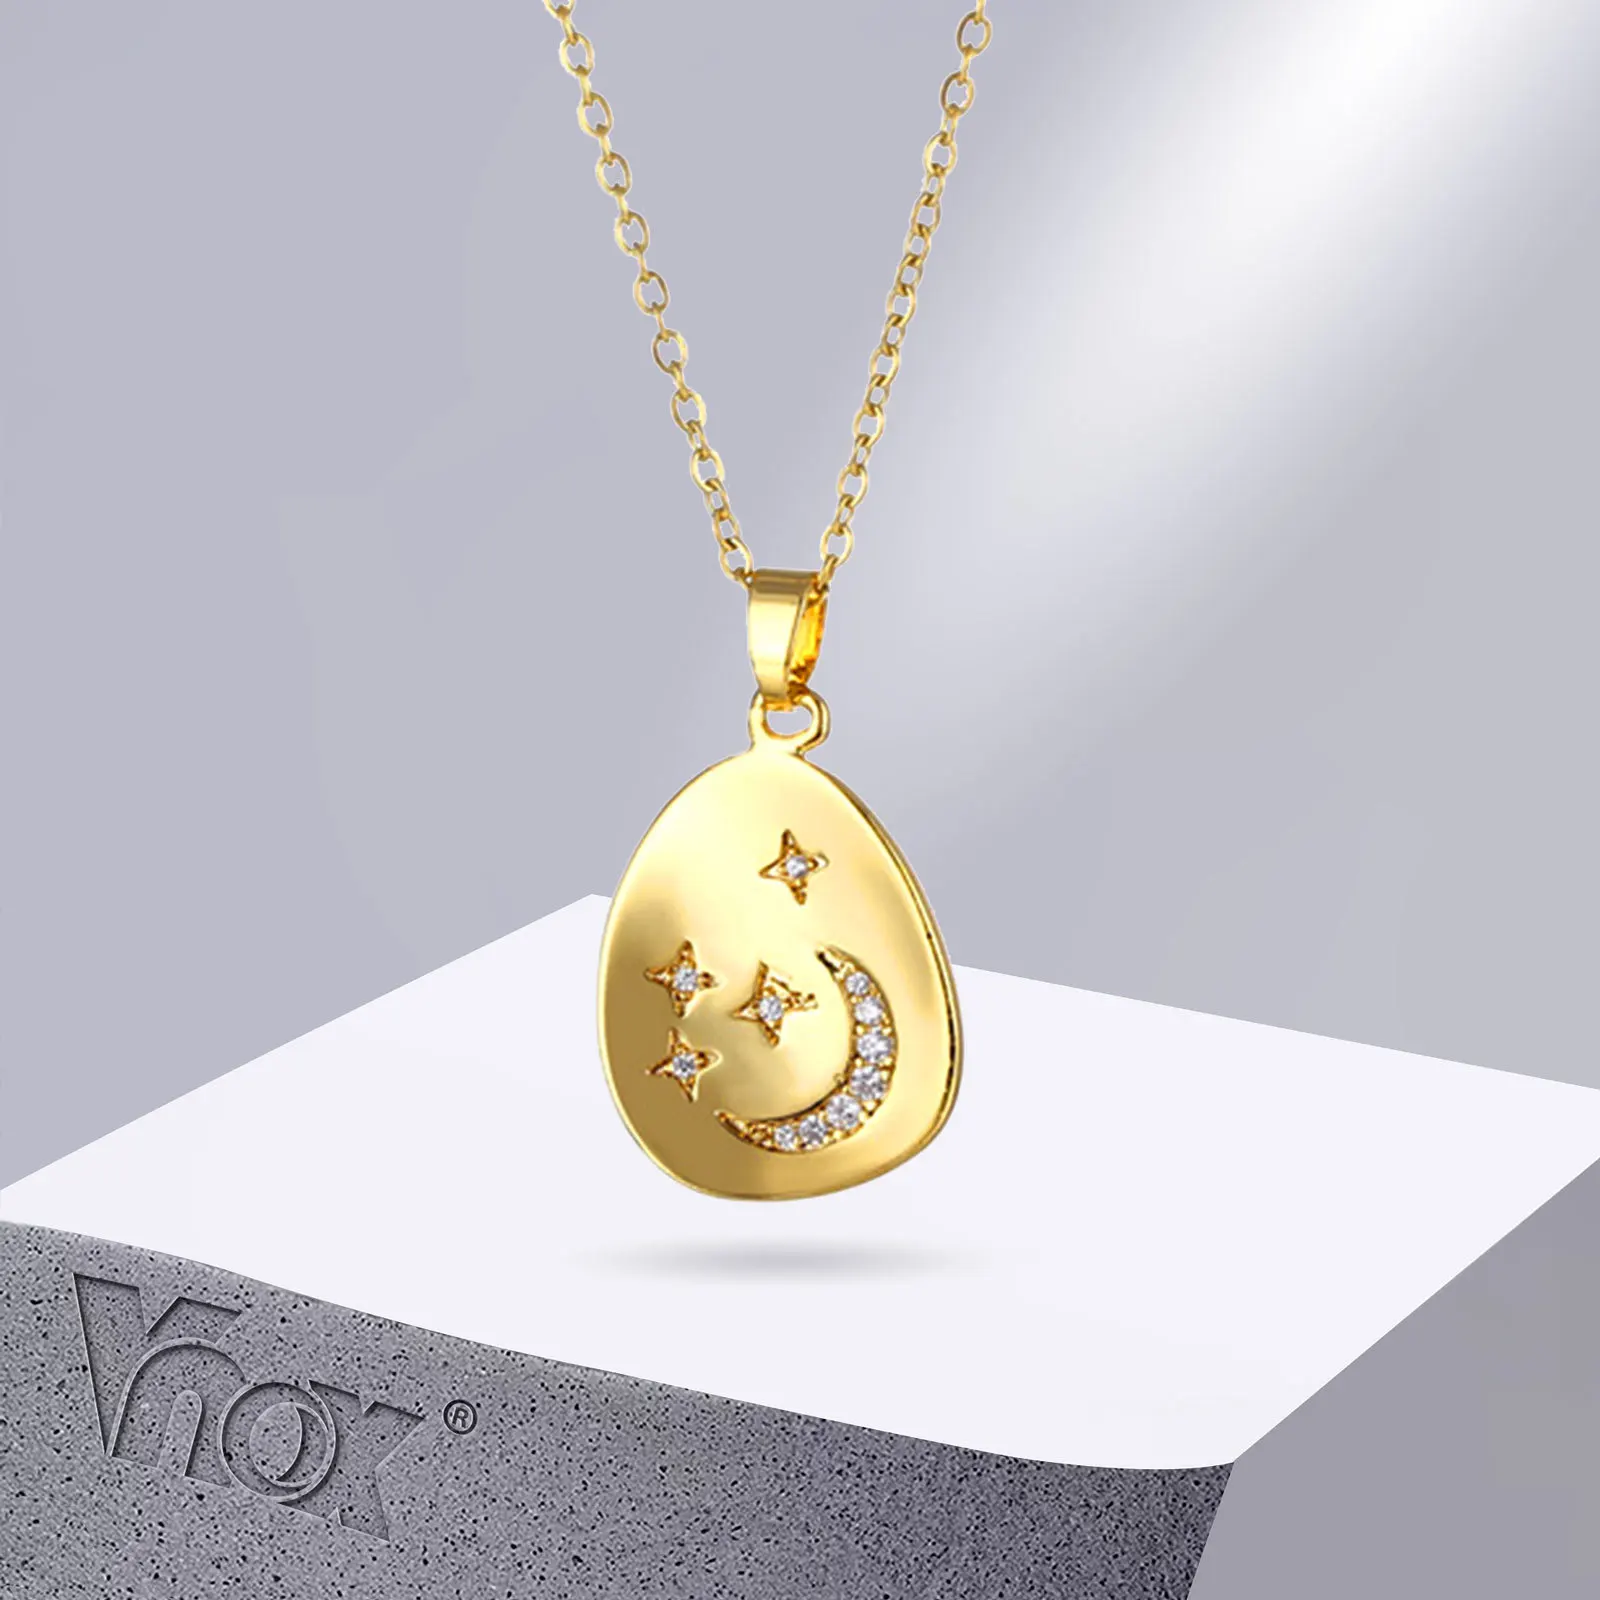 

Vnox Women Pendant, Waterdrop Pendant with Bling Moon Star, Adjustable Gold Color Stainless Steel Neck Colar